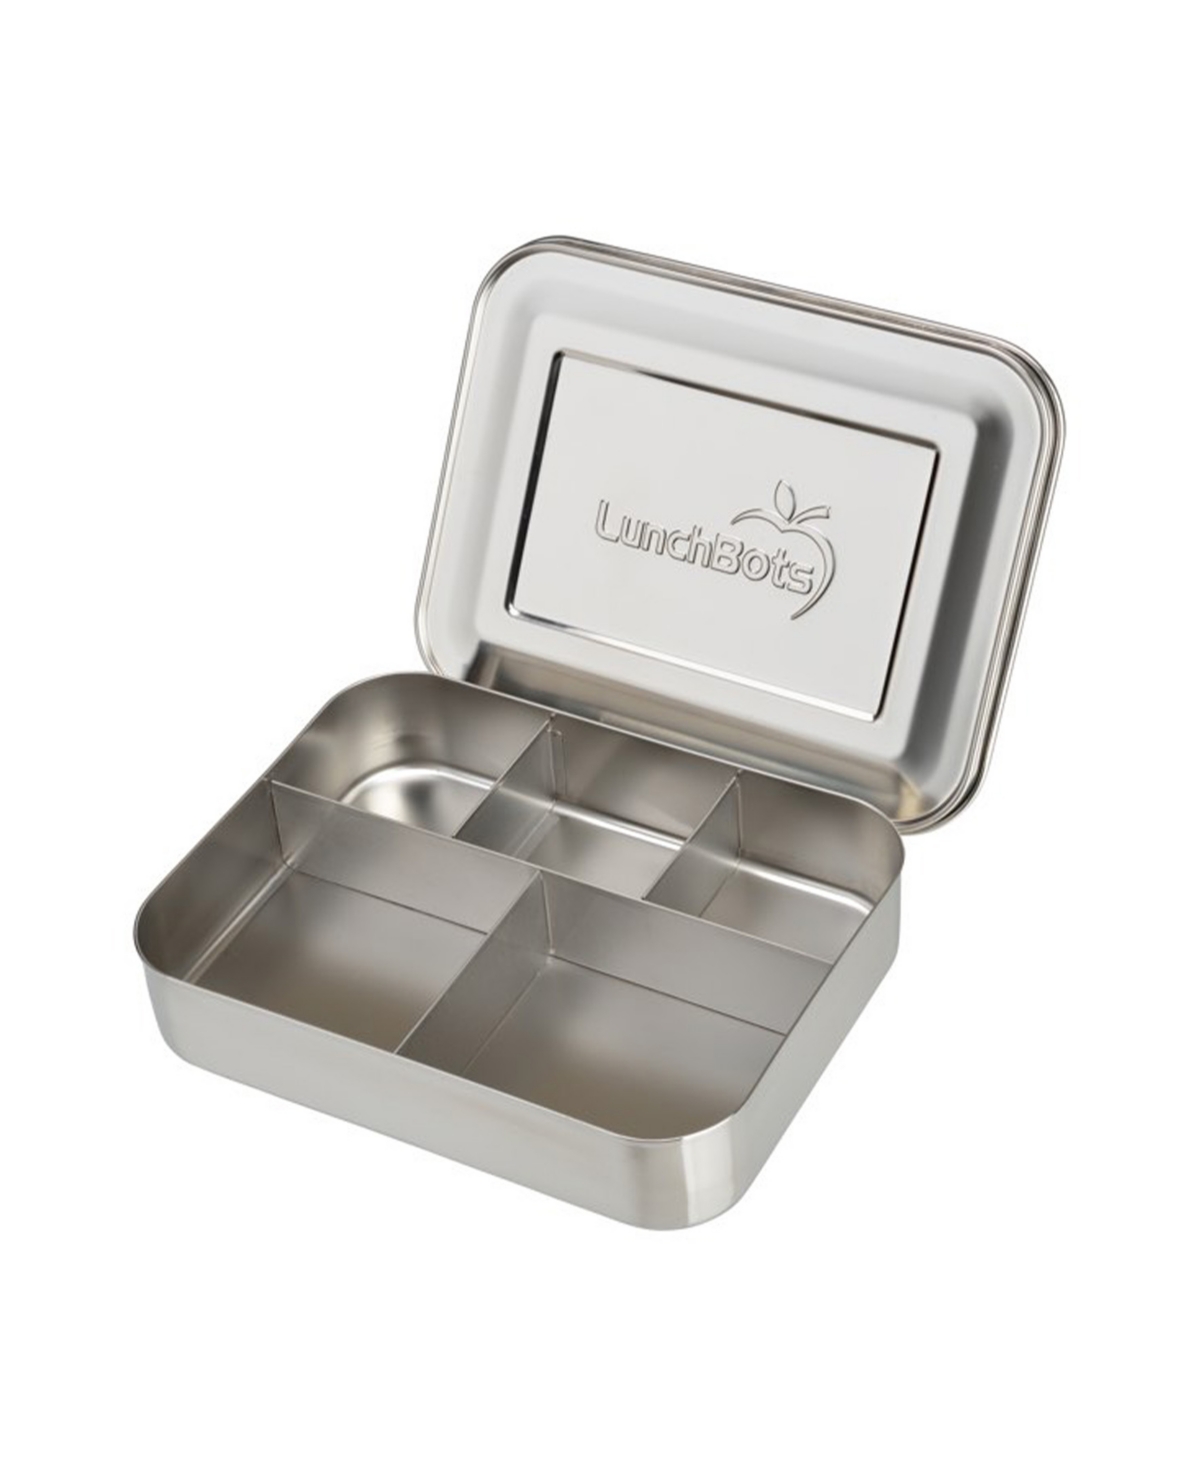 Lunchbots Large Stainless Steel Bento Lunch Box 5 Sections